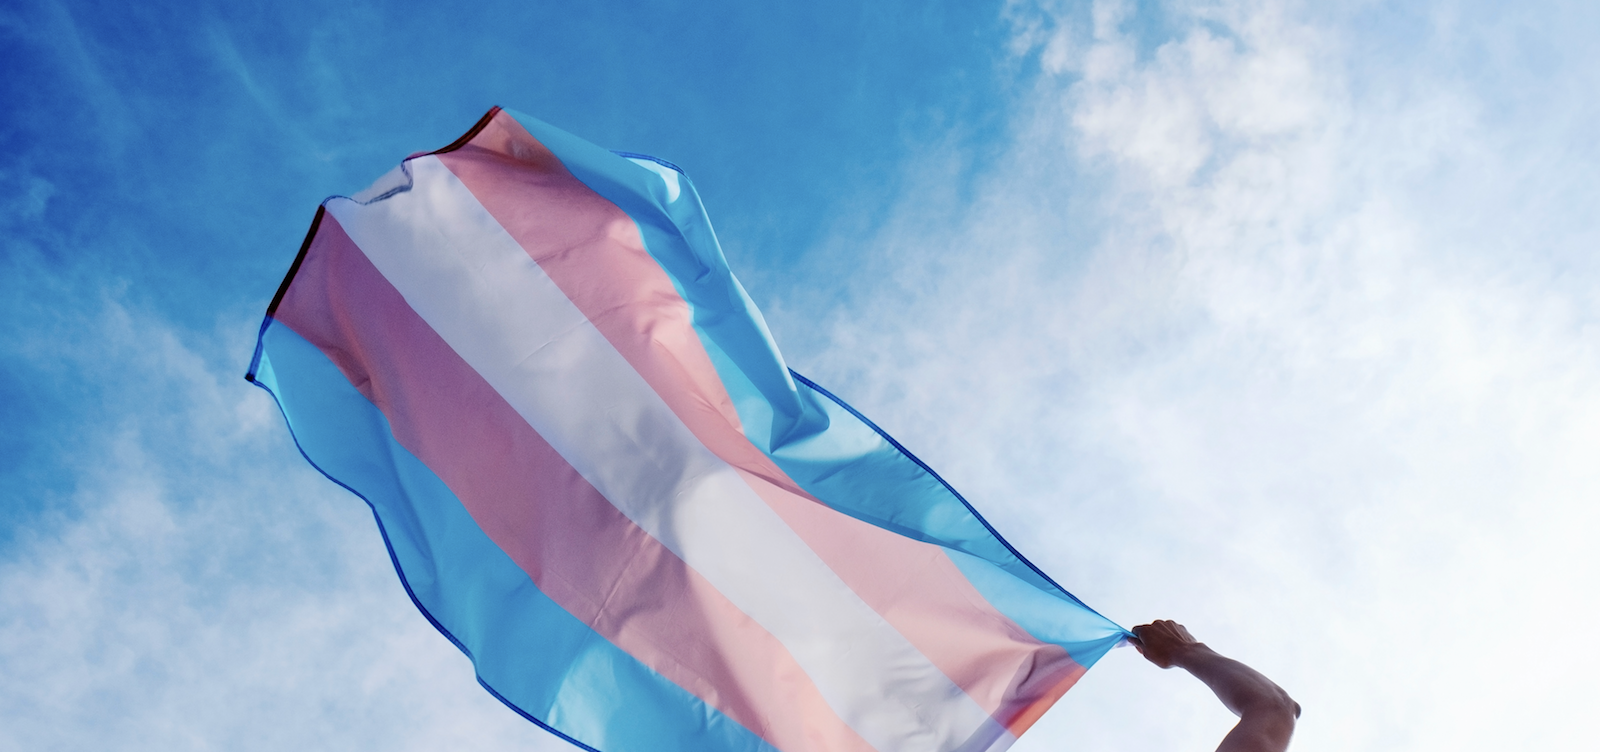 A trans flag (blue, pink, white stripes) is held in the air.